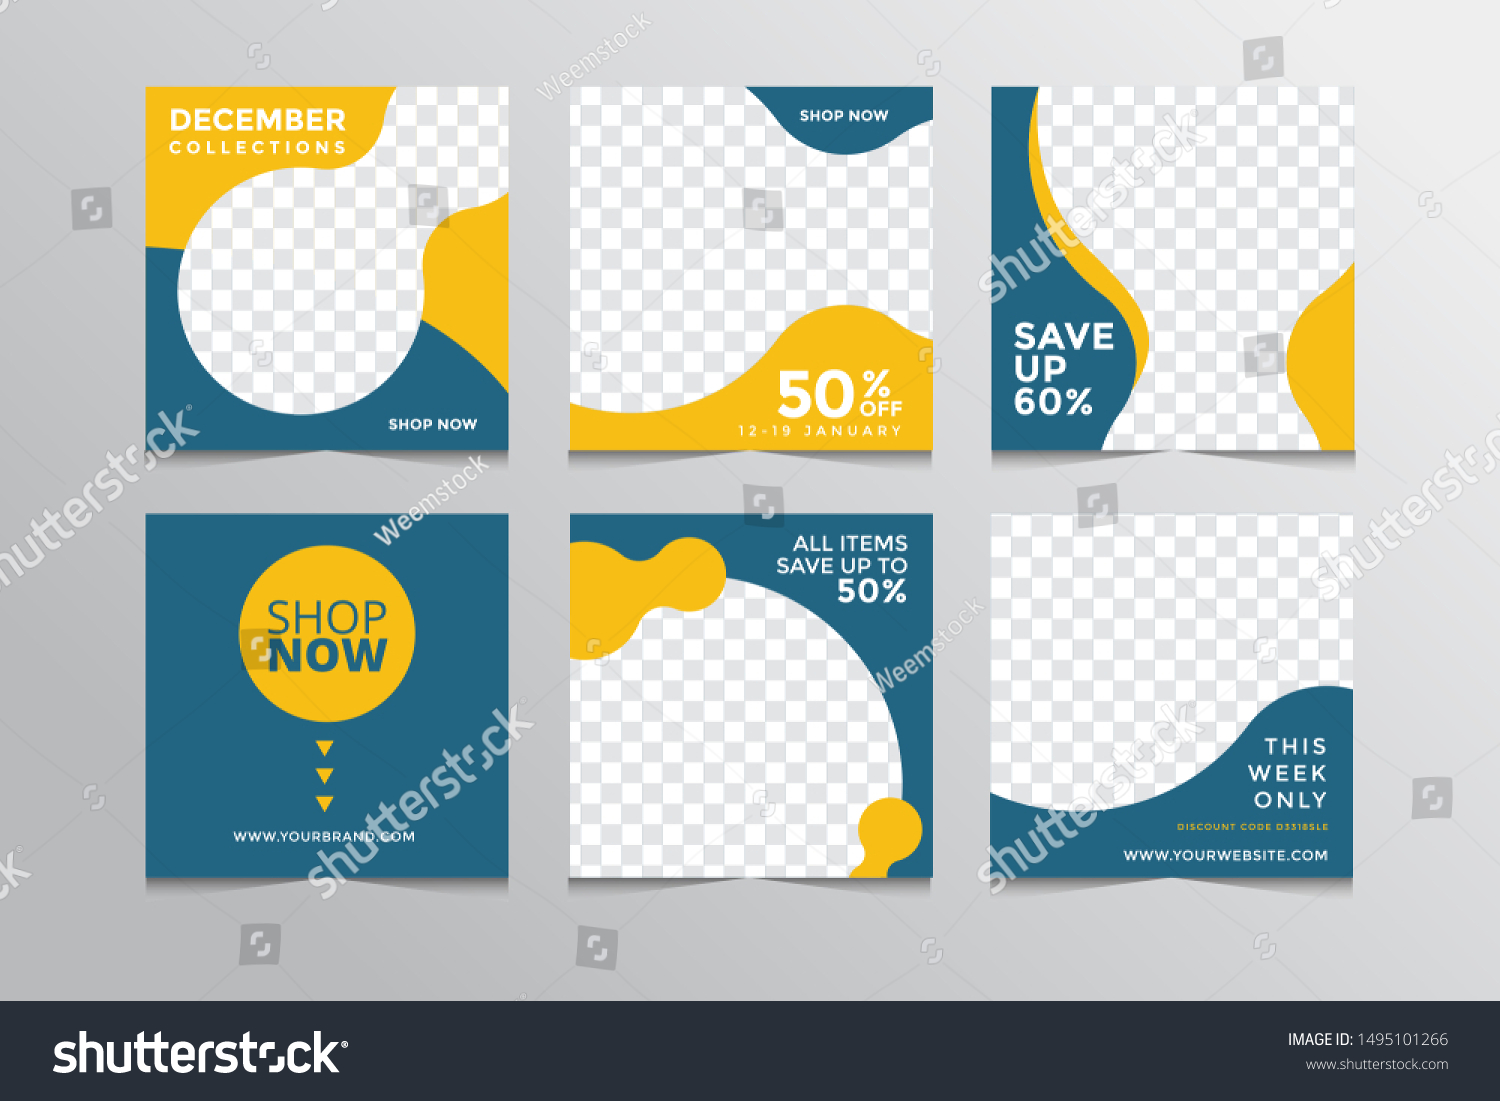 Slides abstract Unique Editable modern Social Media banner Template.Anyone can use This Design Easily.Promotional web banner for social media. Elegant sale and discount promo - Vector. #1495101266